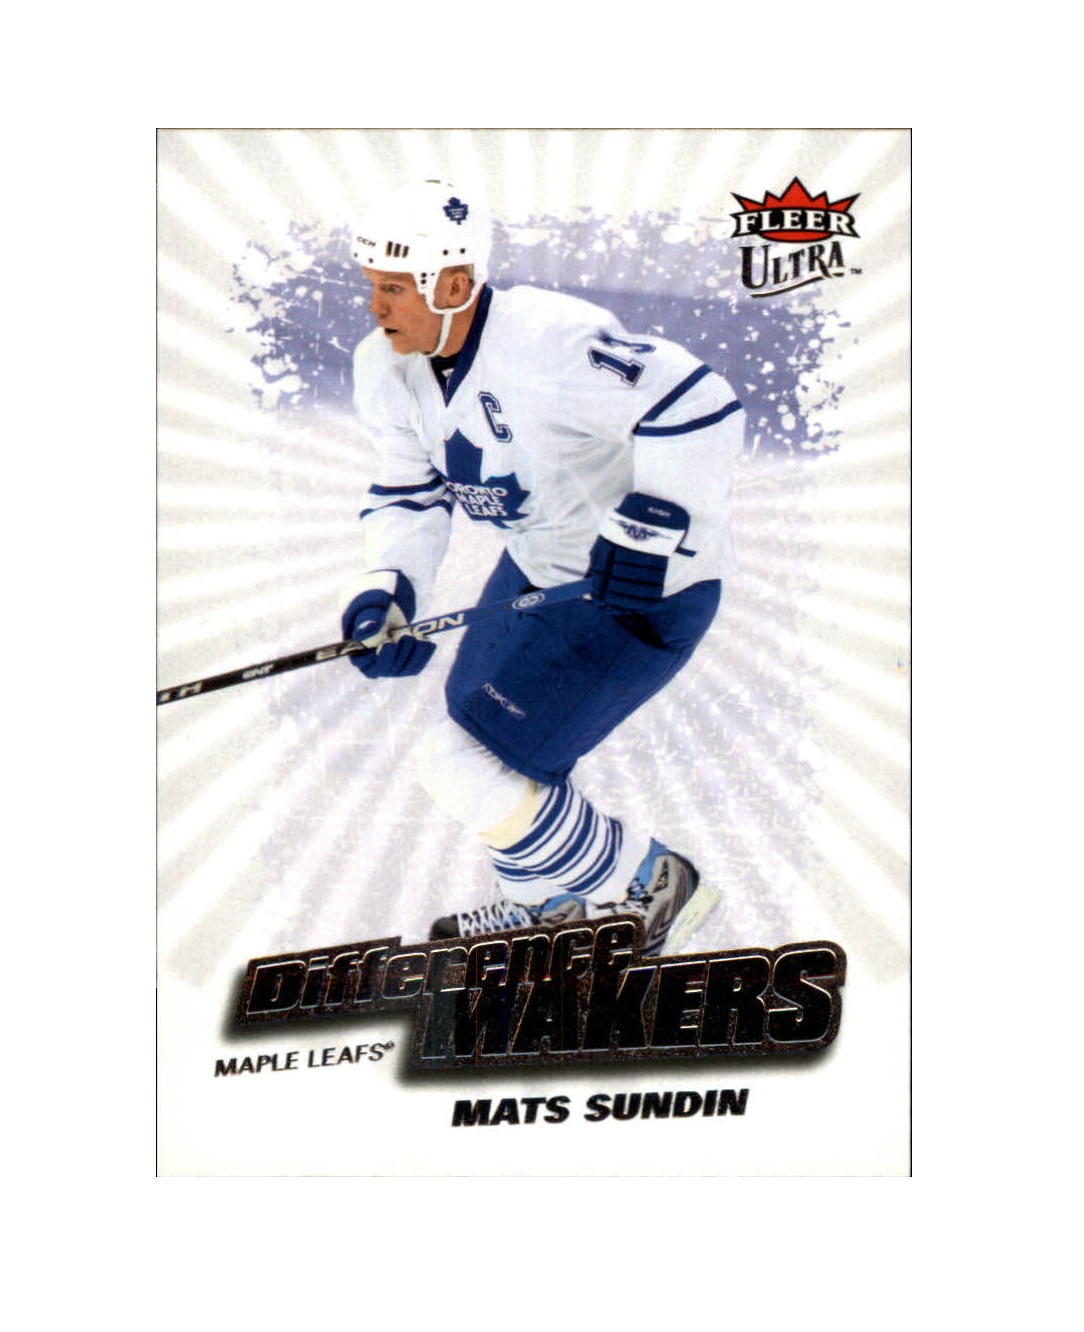 2008-09 Ultra Difference Makers #DM20 Mats Sundin (10-X62-MAPLE LEAFS)